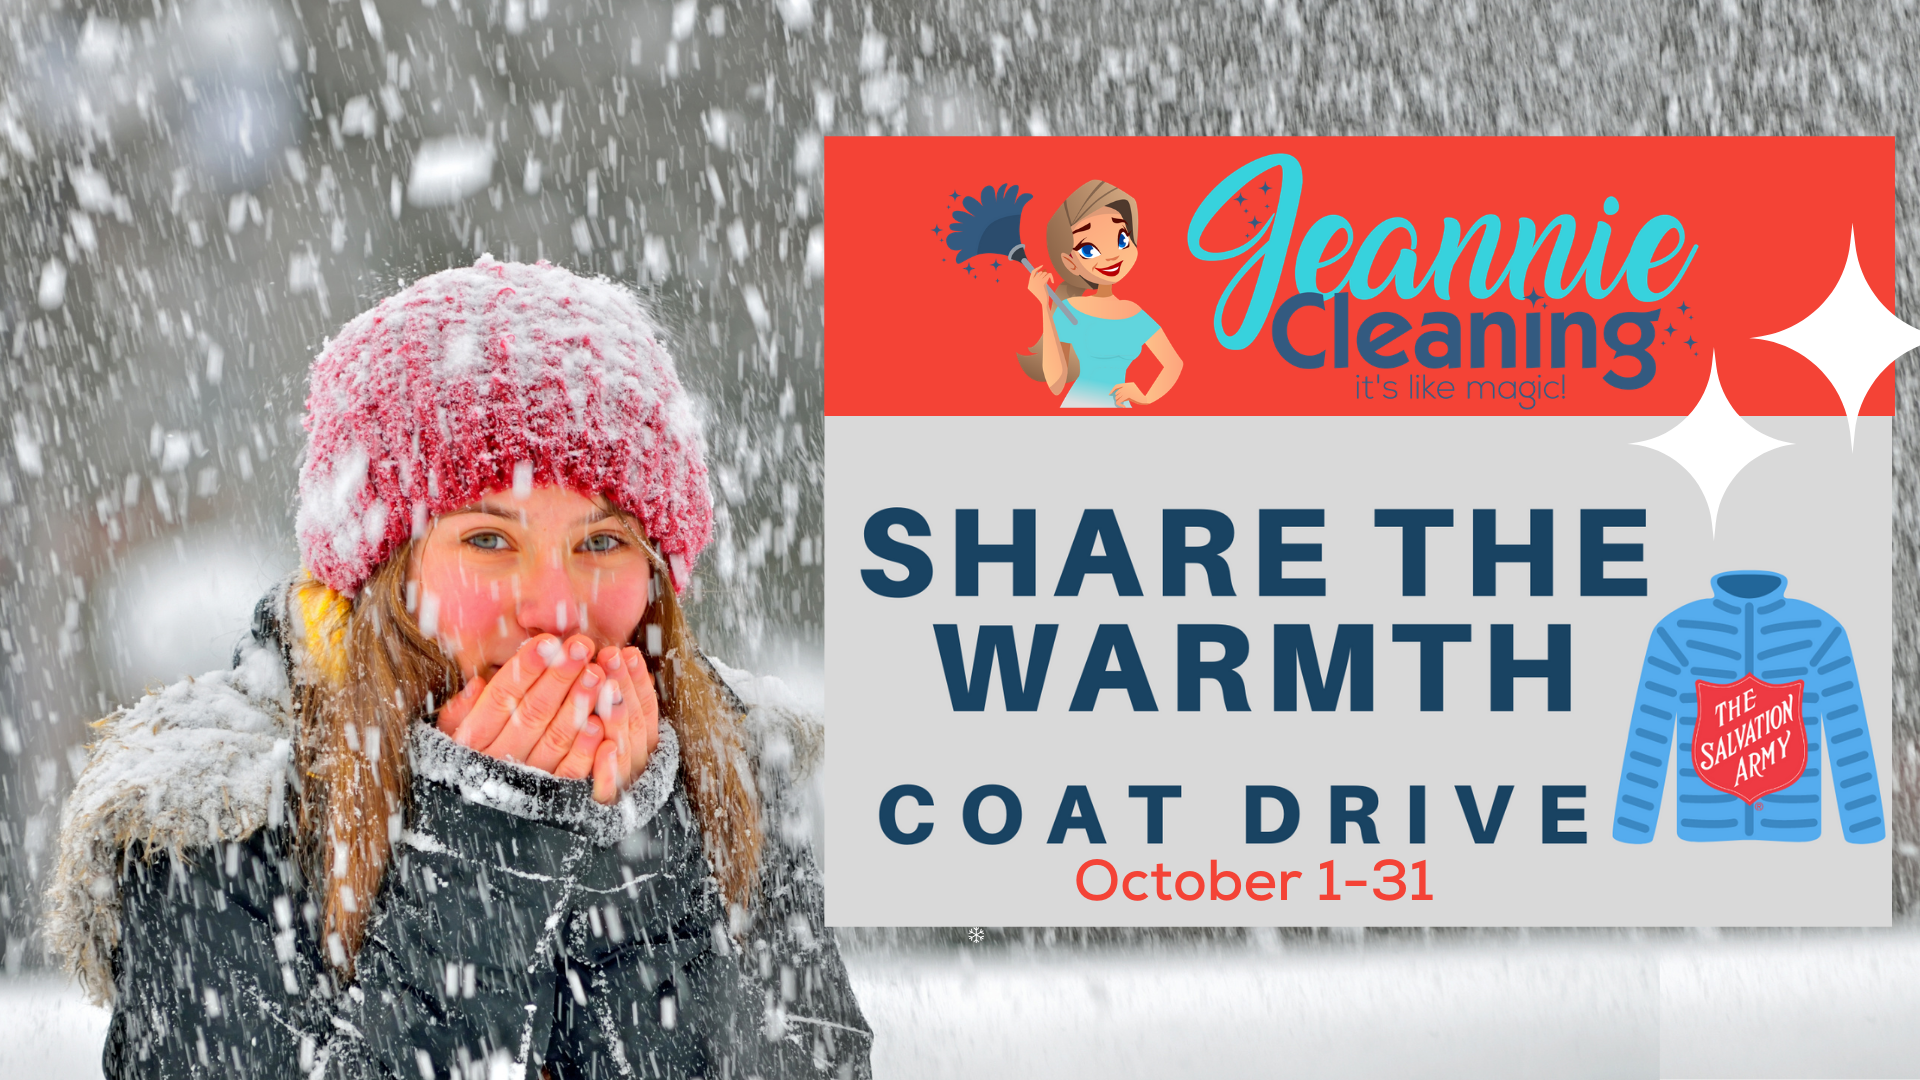 Jeannie Cleaning Supports Share The Warmth Coat Drive